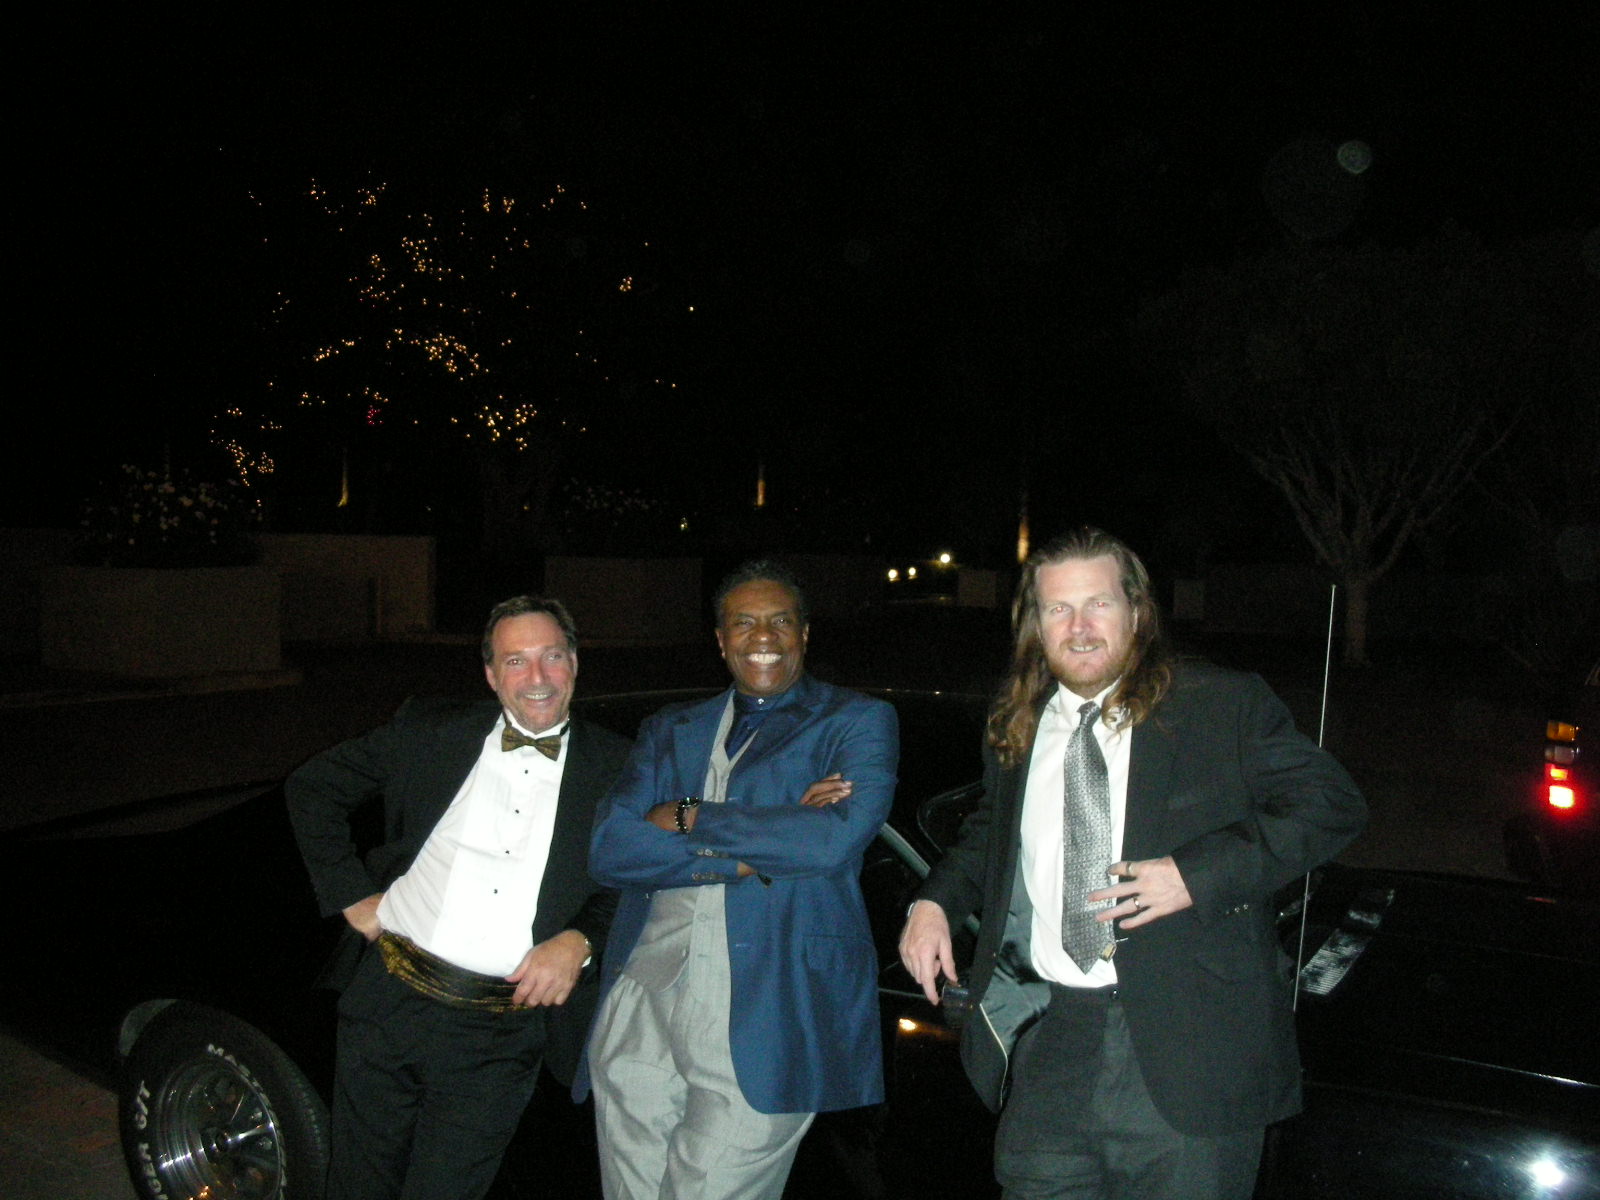 CW Crowe Jr, Keith David and Jesse Johnson (l to r) with Hero car from the film at Cinema City Intl Film Festival Awards Gala for The Butcher (nominated Best Picture)